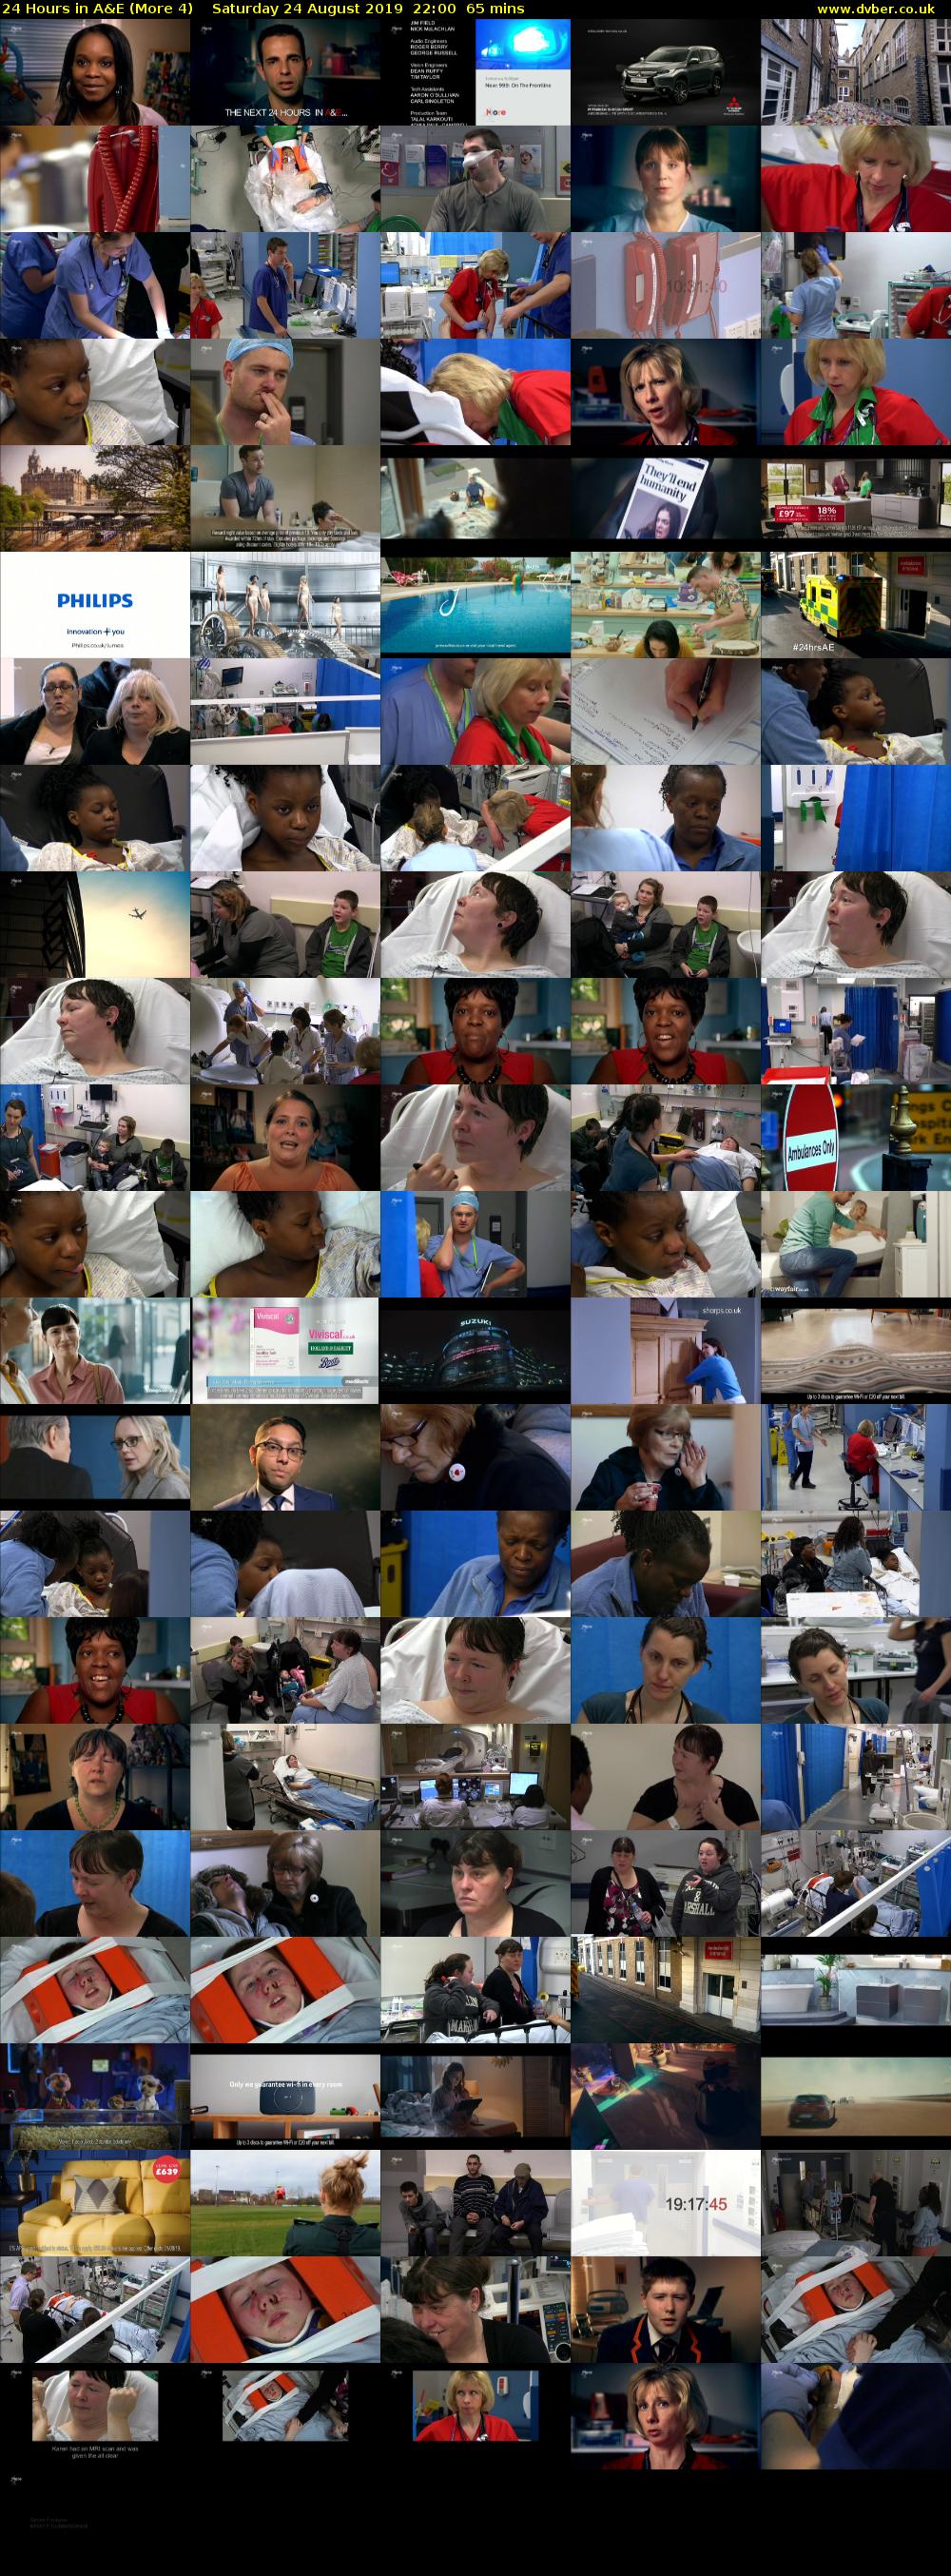 24 Hours in A&E (More 4) Saturday 24 August 2019 22:00 - 23:05